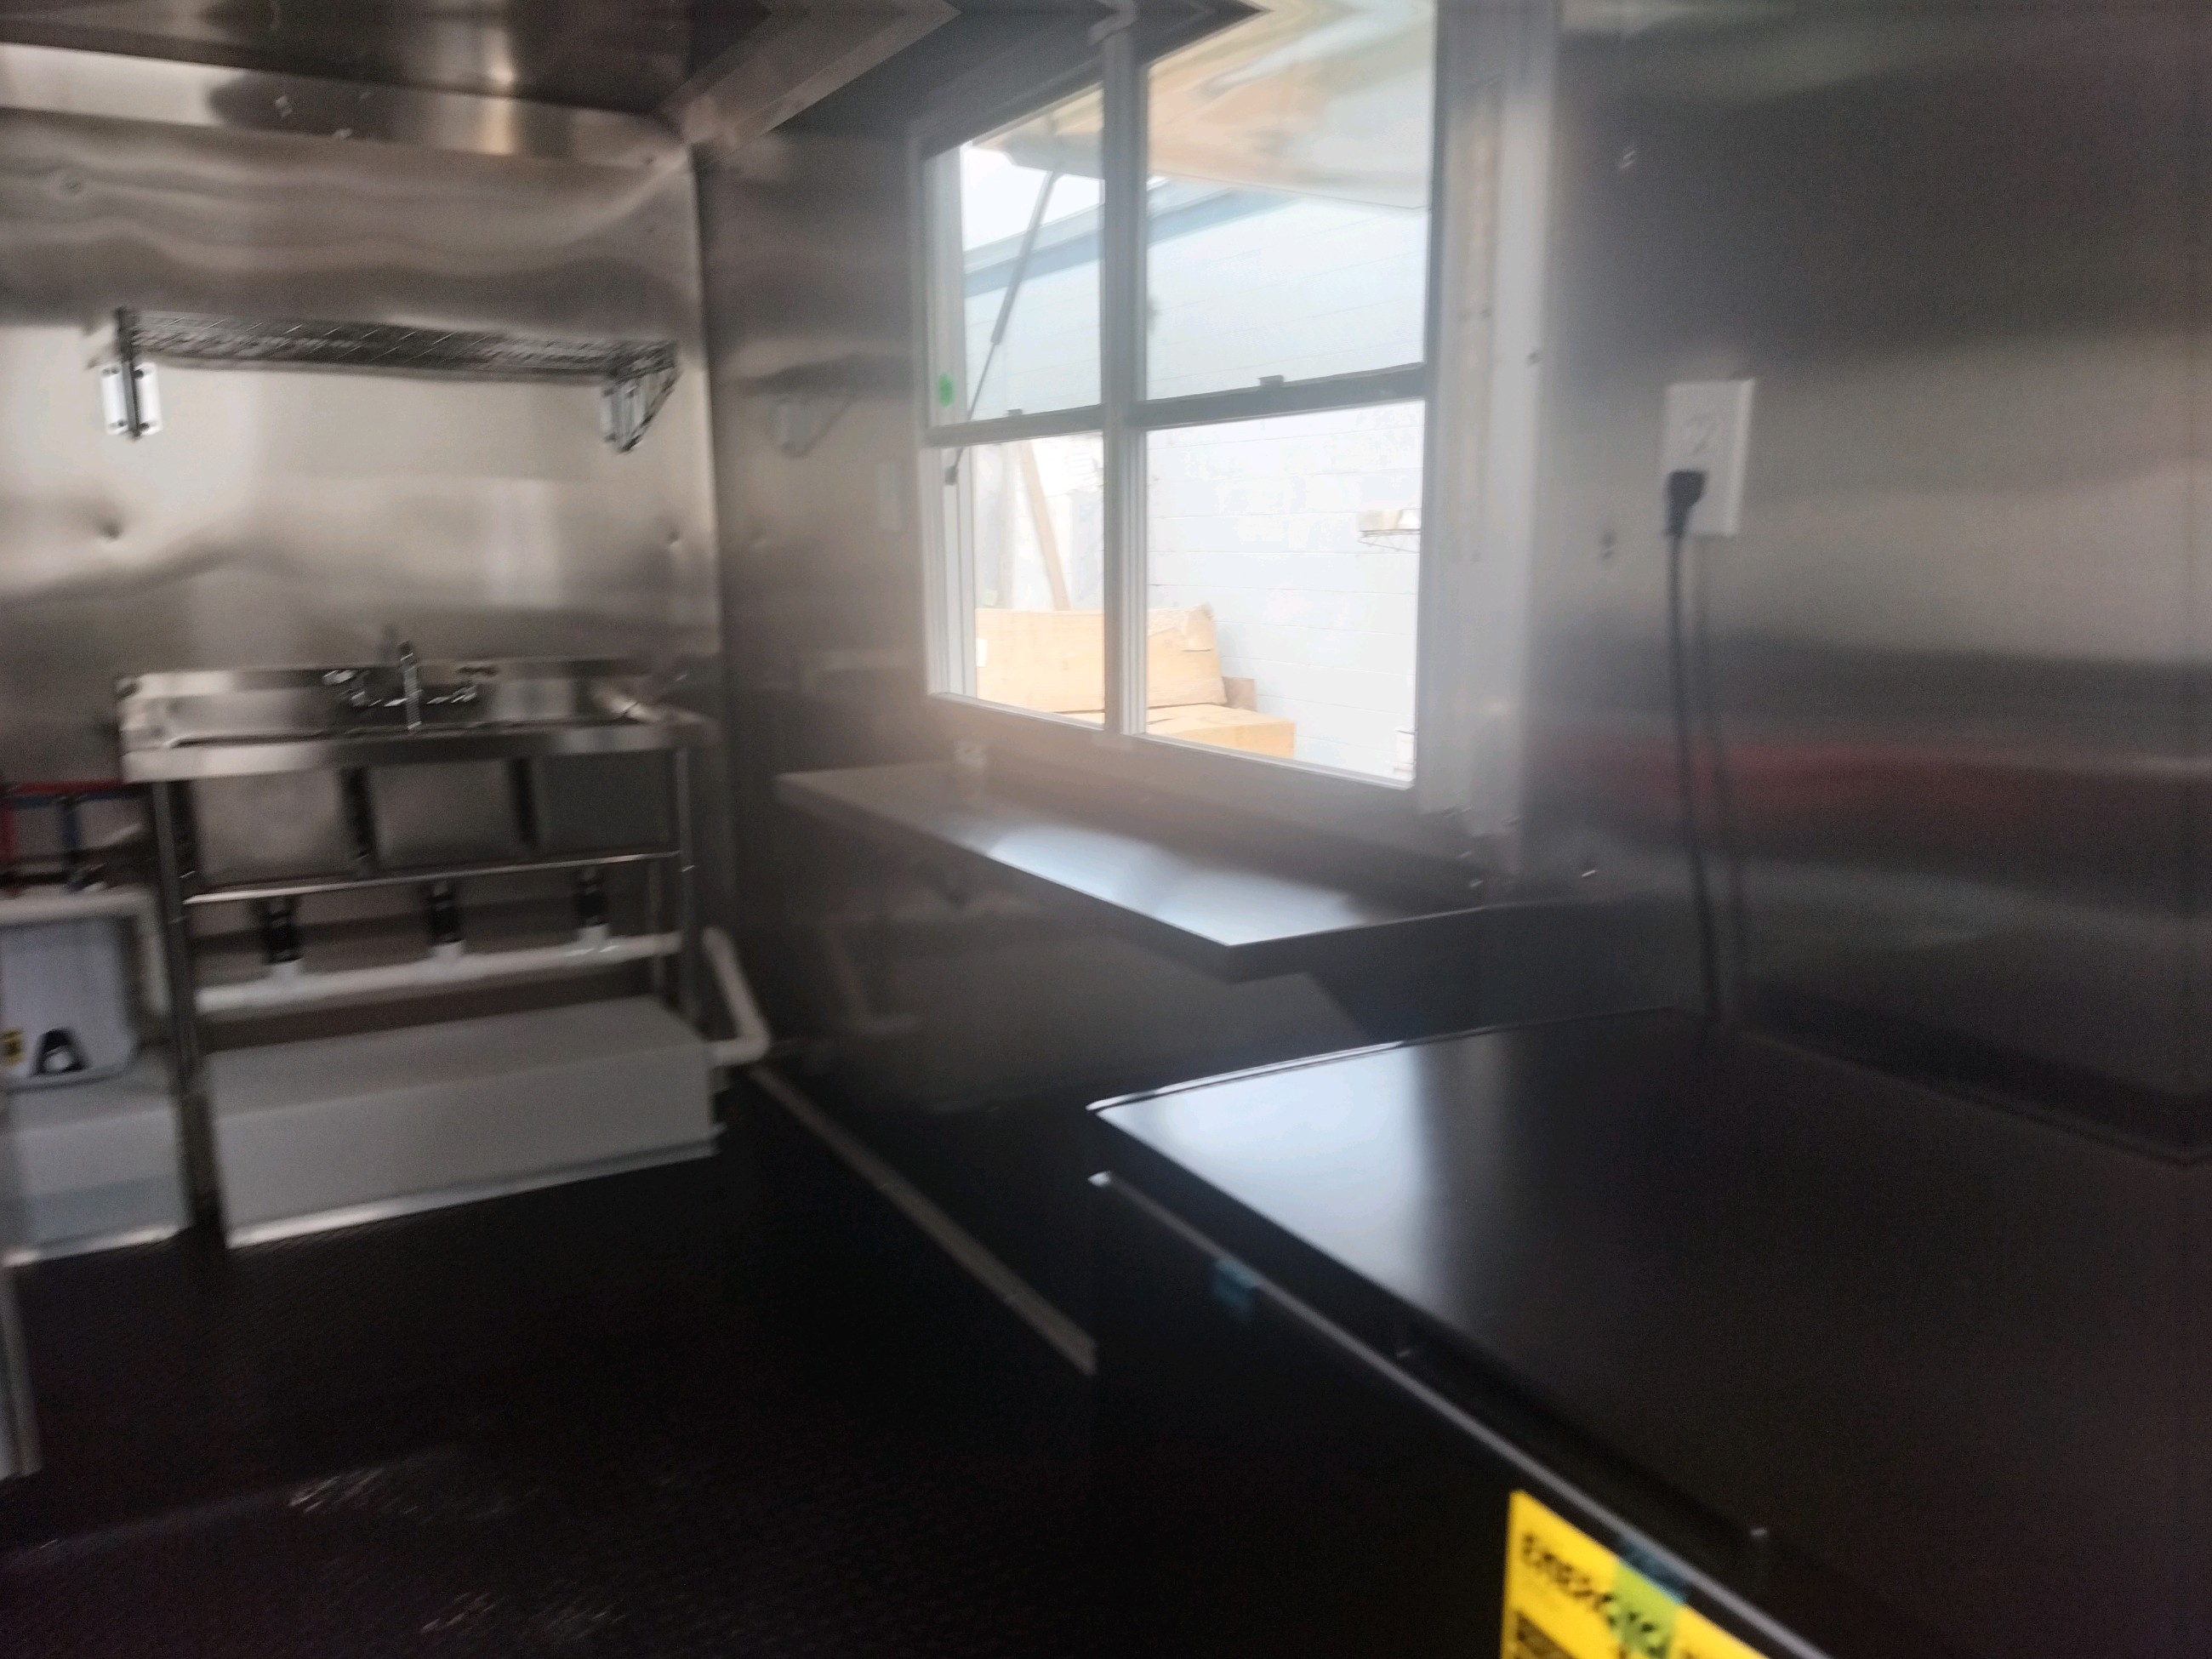 Rent To Own Concession Trailer